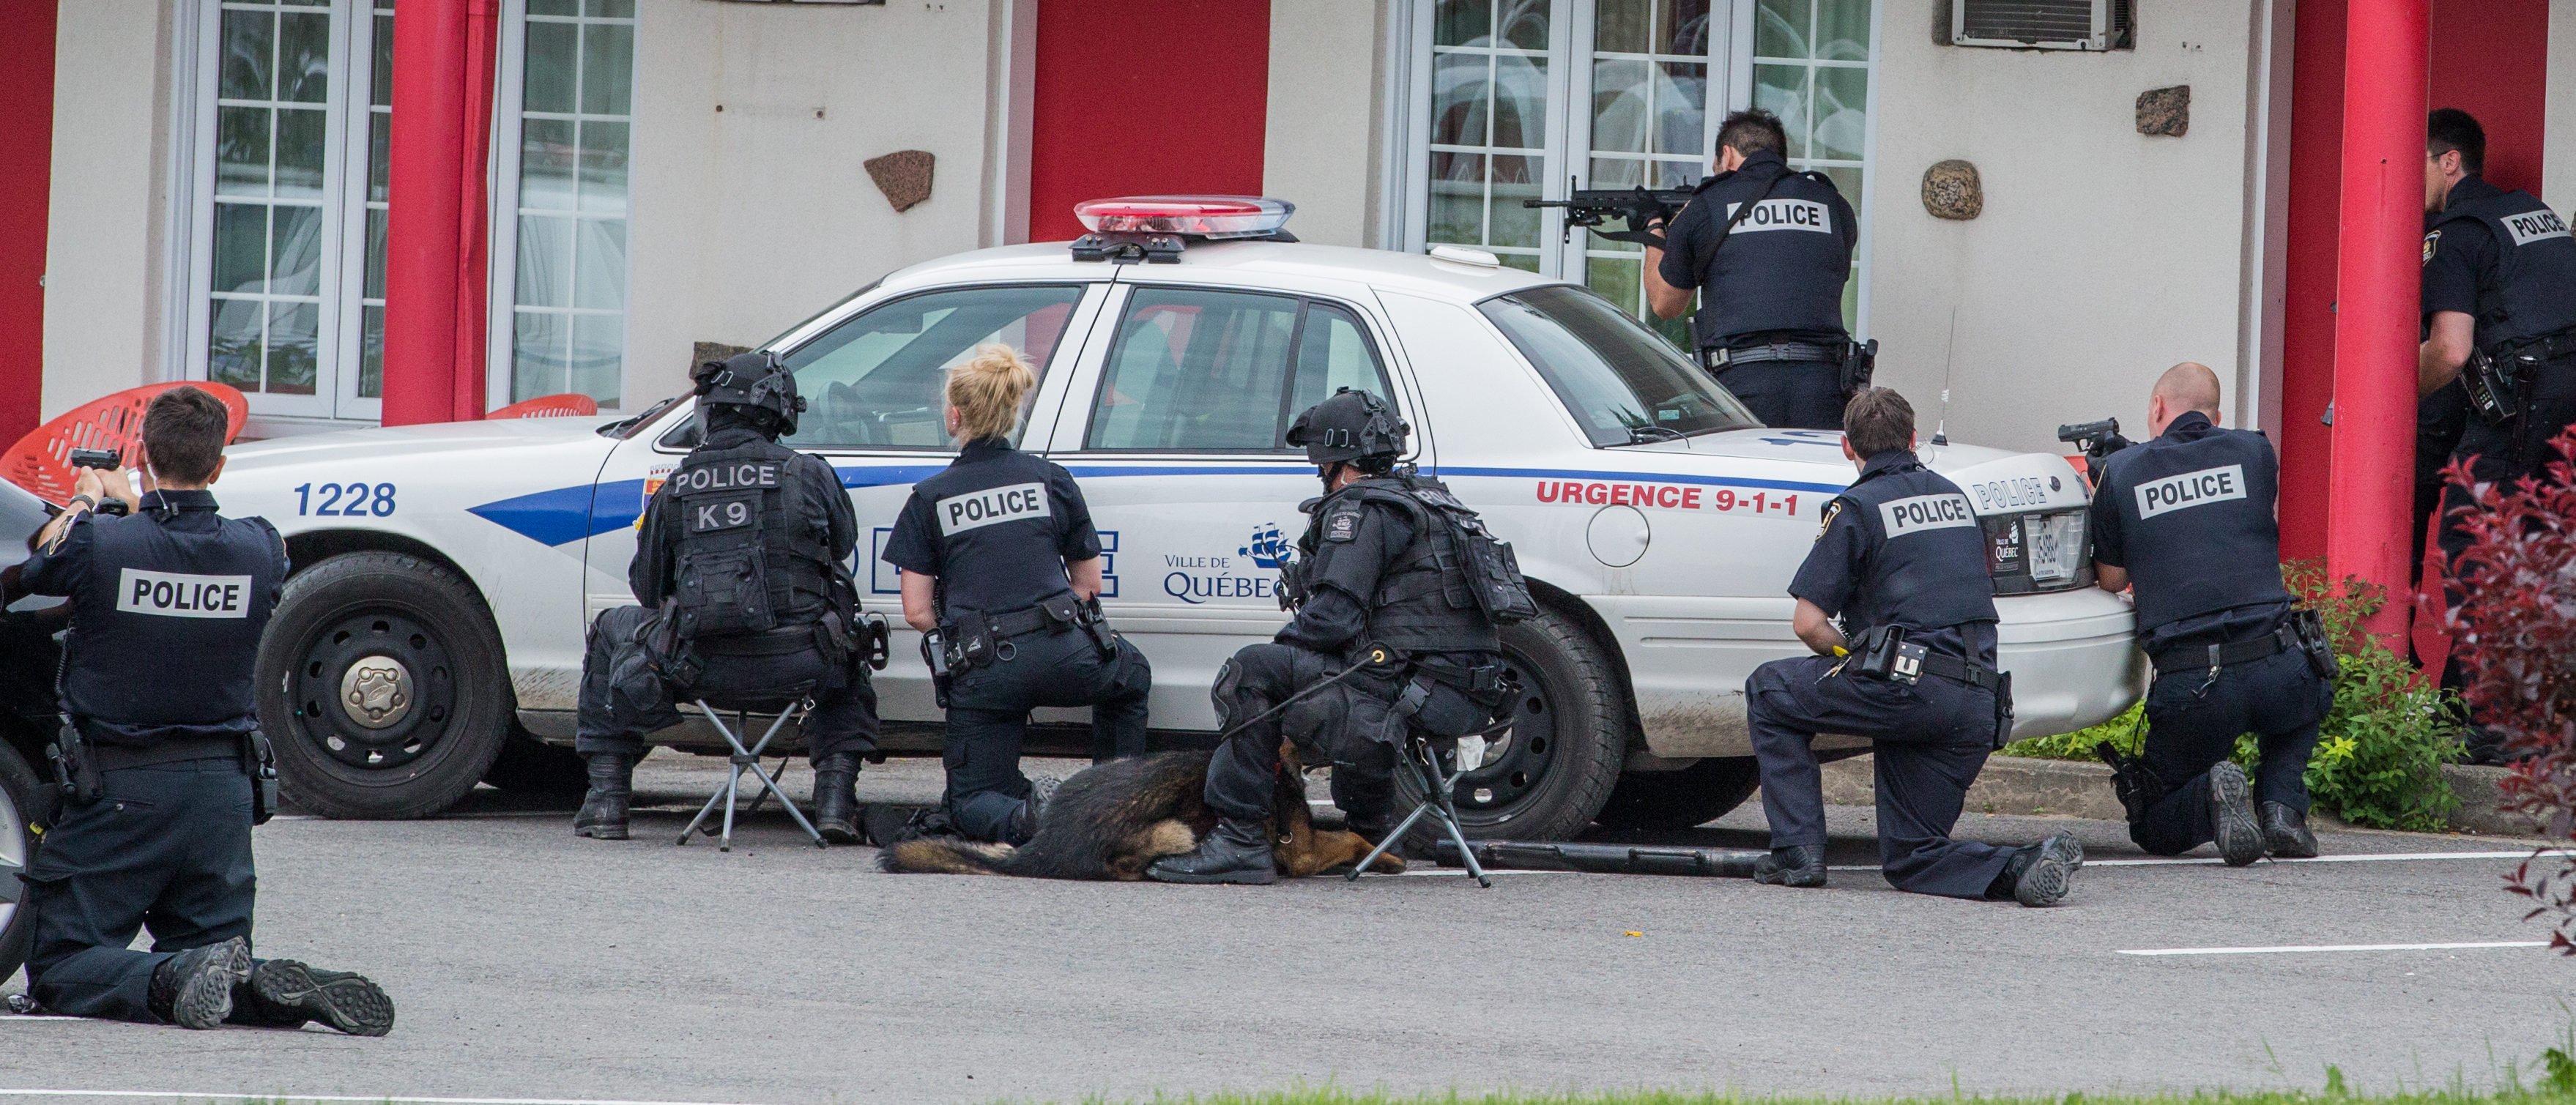 Police-during-hostage-situation-e1547491972997.jpg